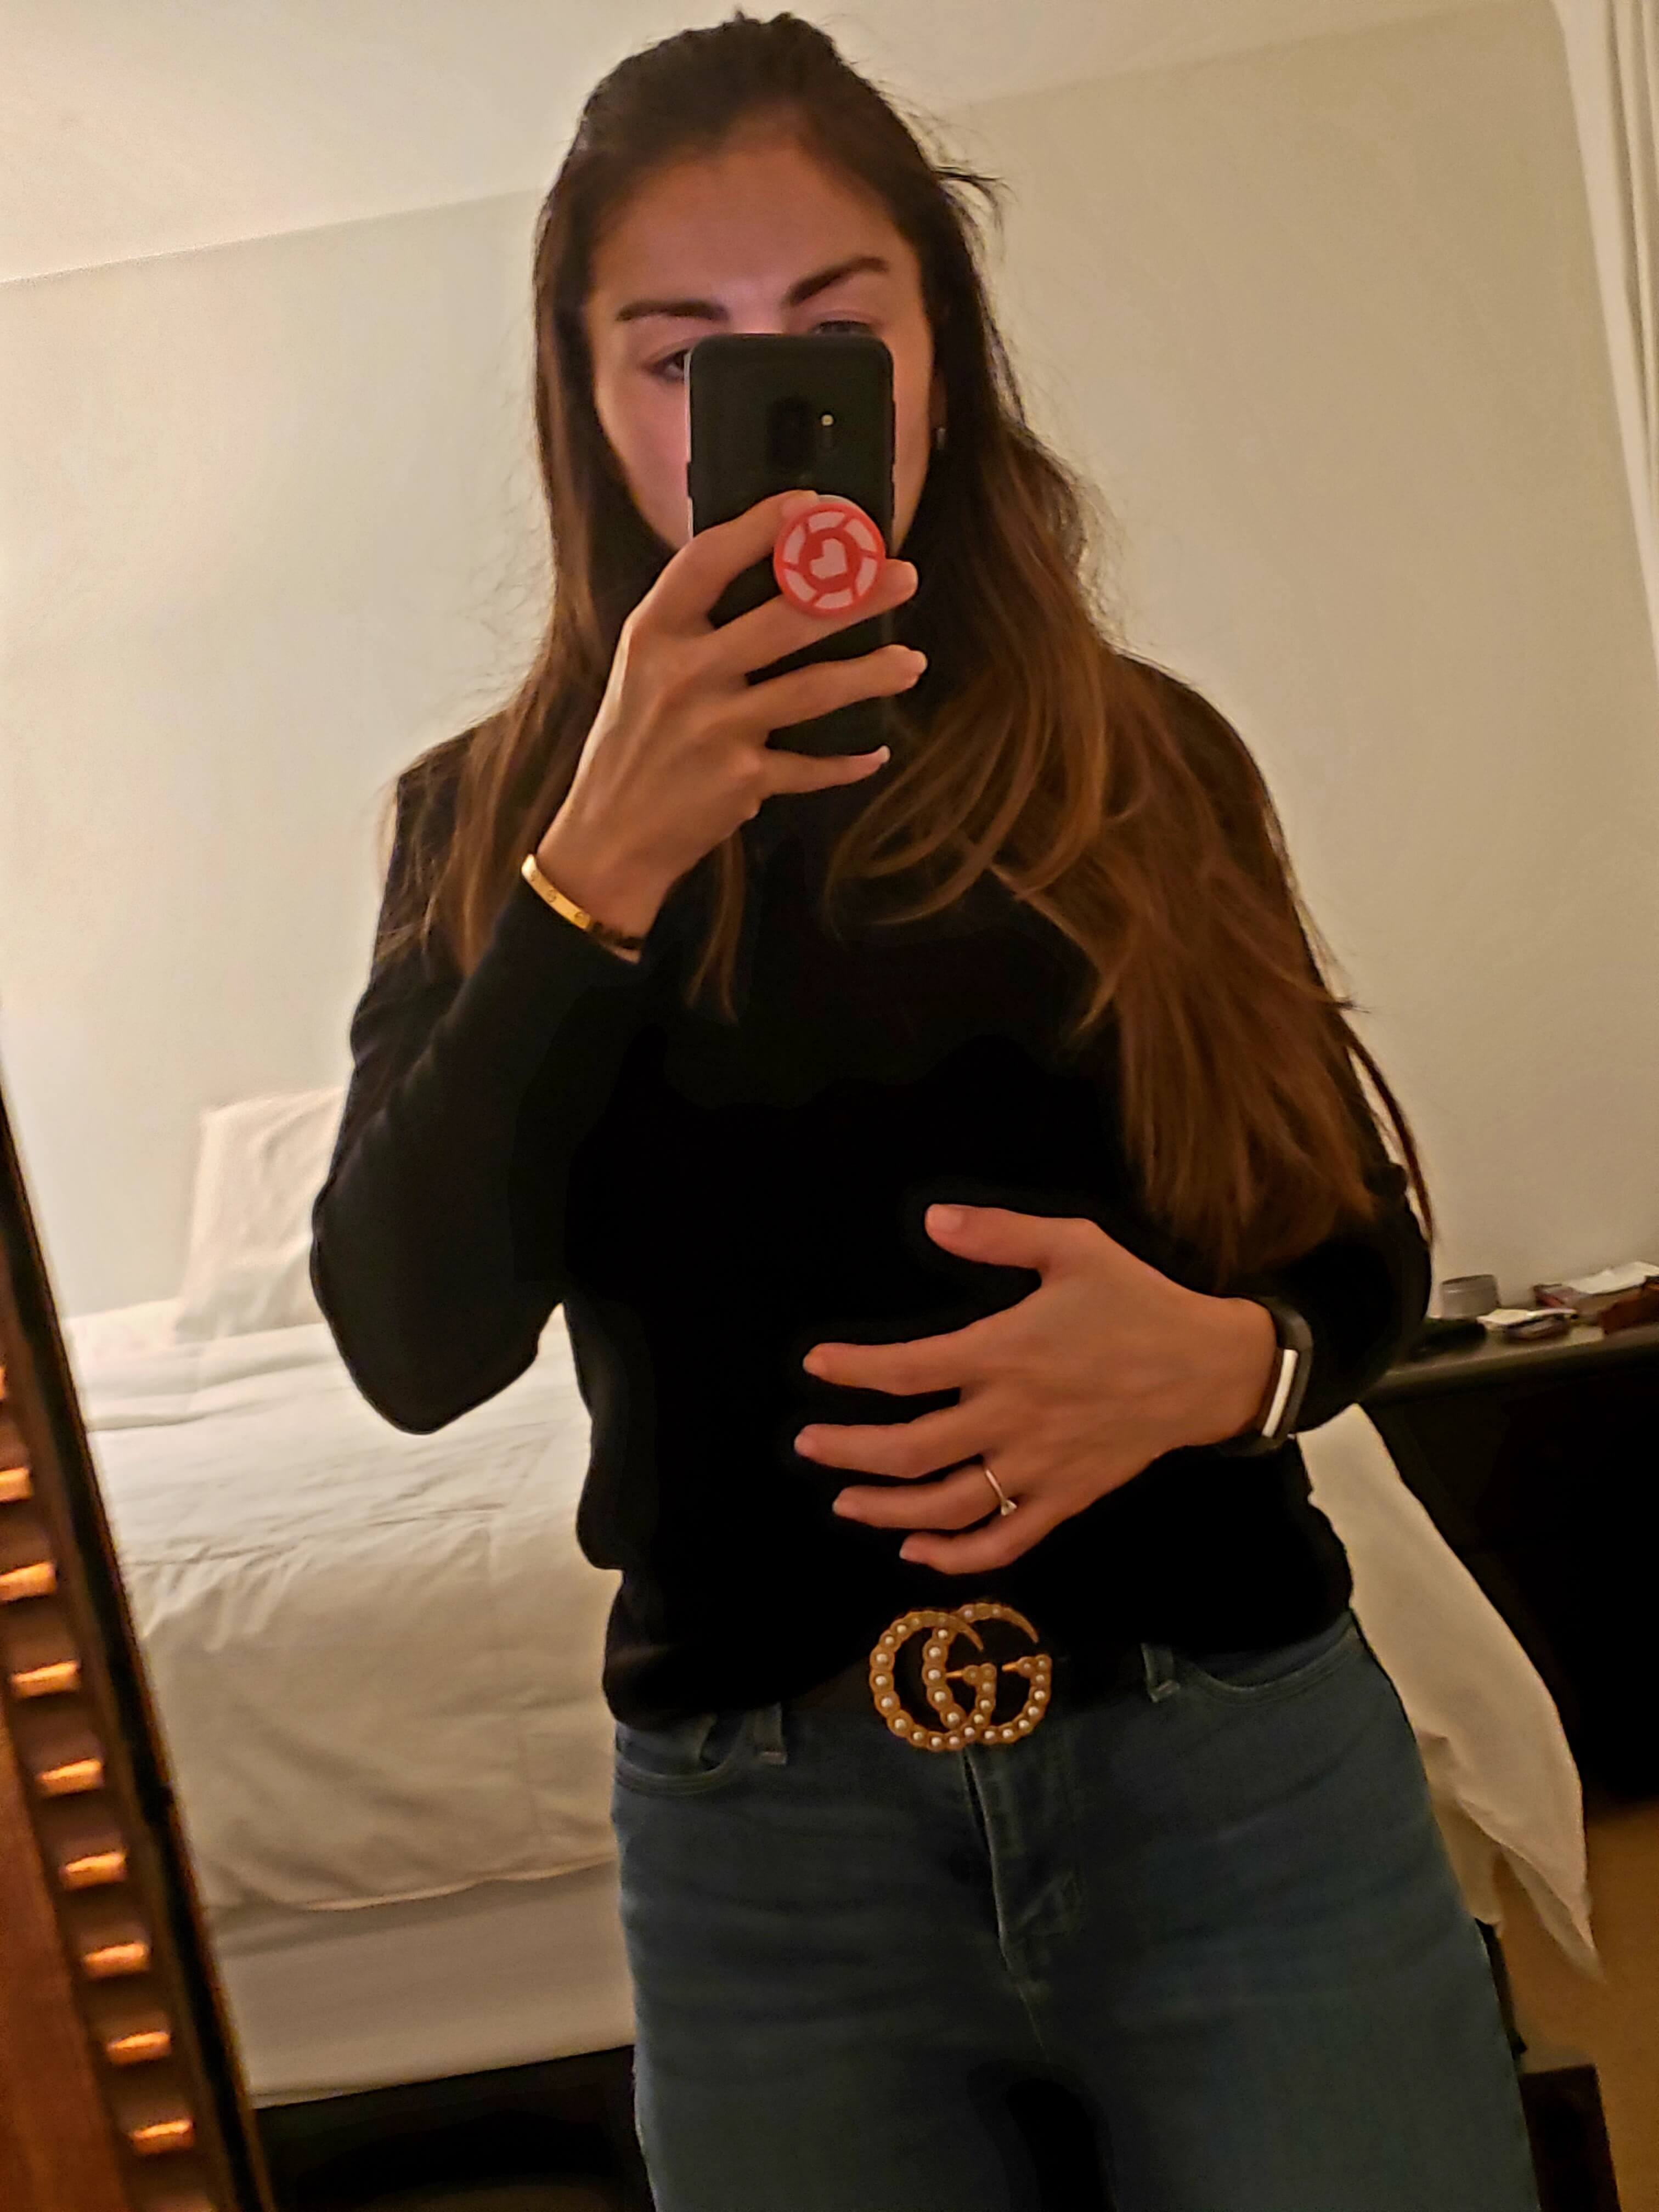 Minimalist-ish outfit and GG belt